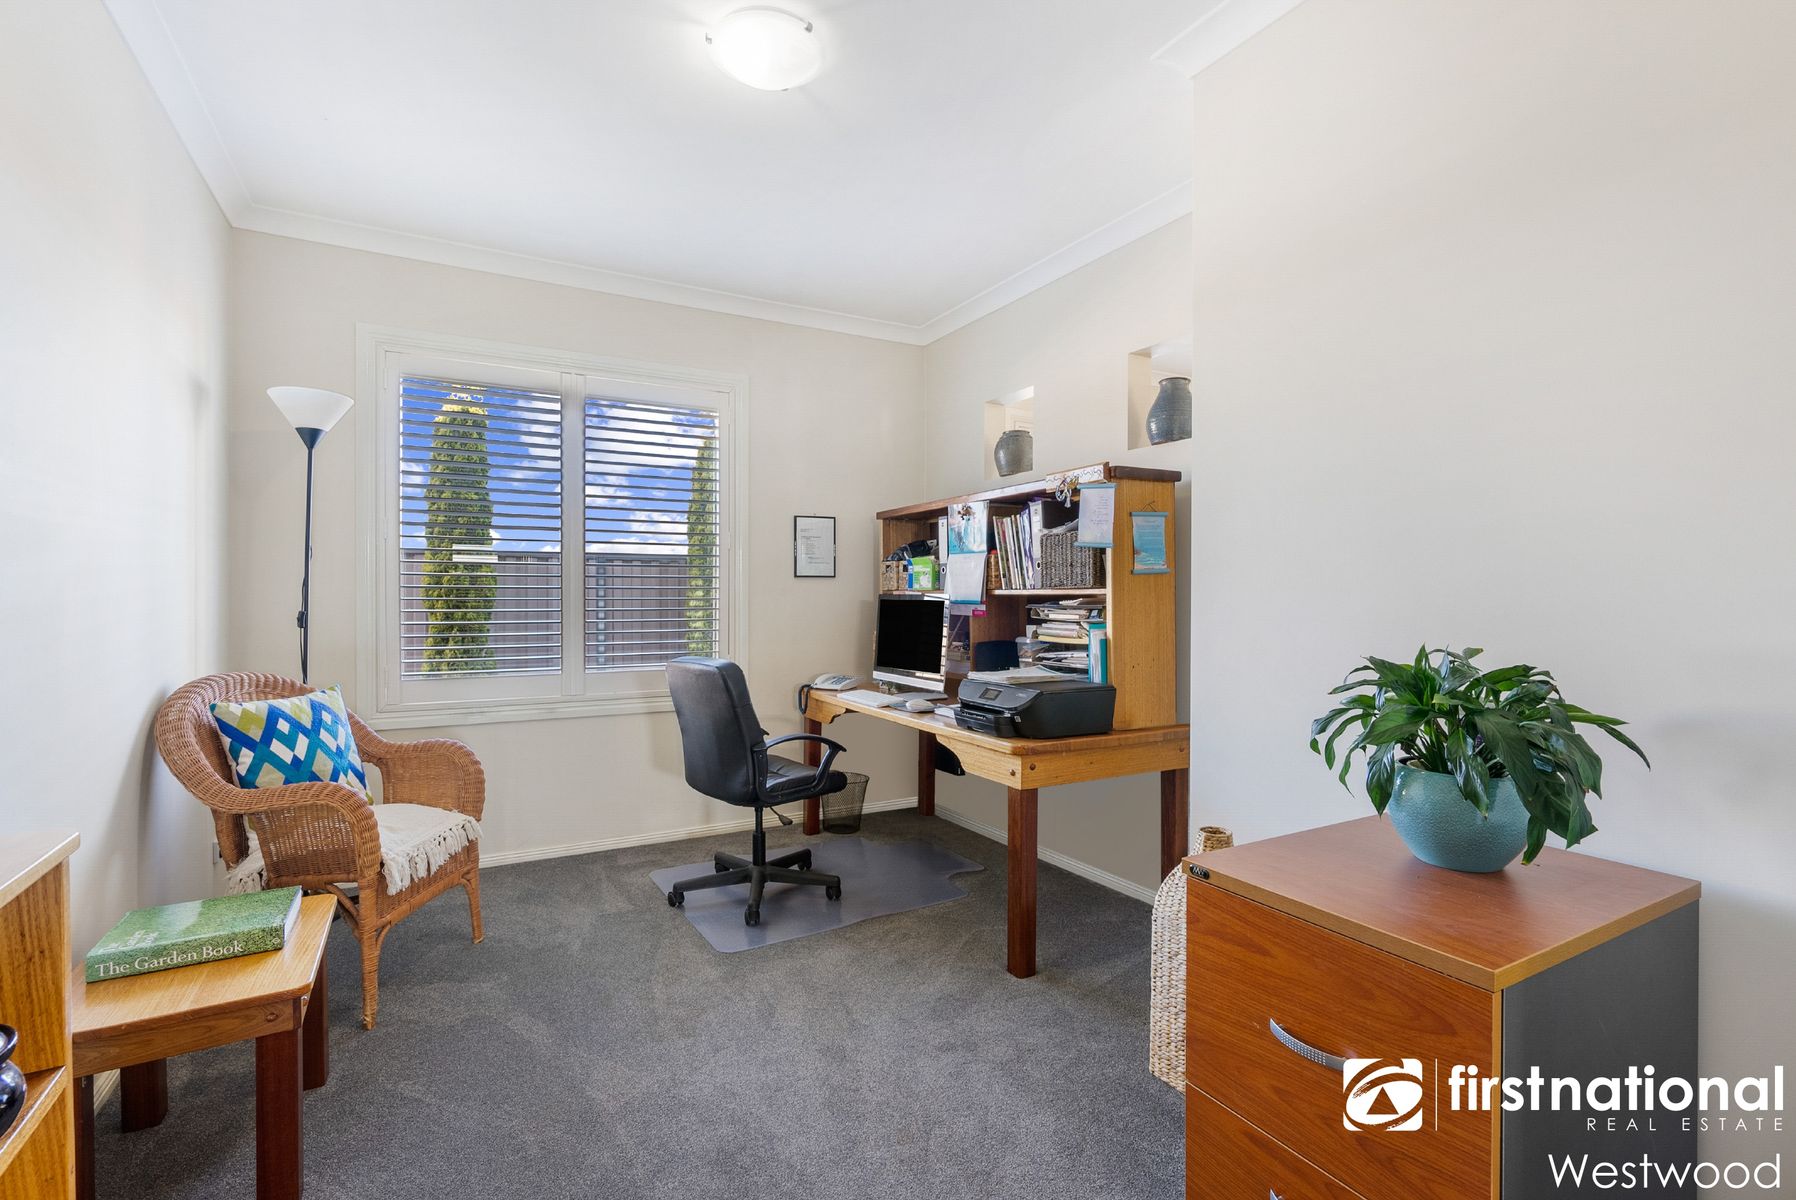 73 Cuttriss Road, Werribee South, VIC 3030